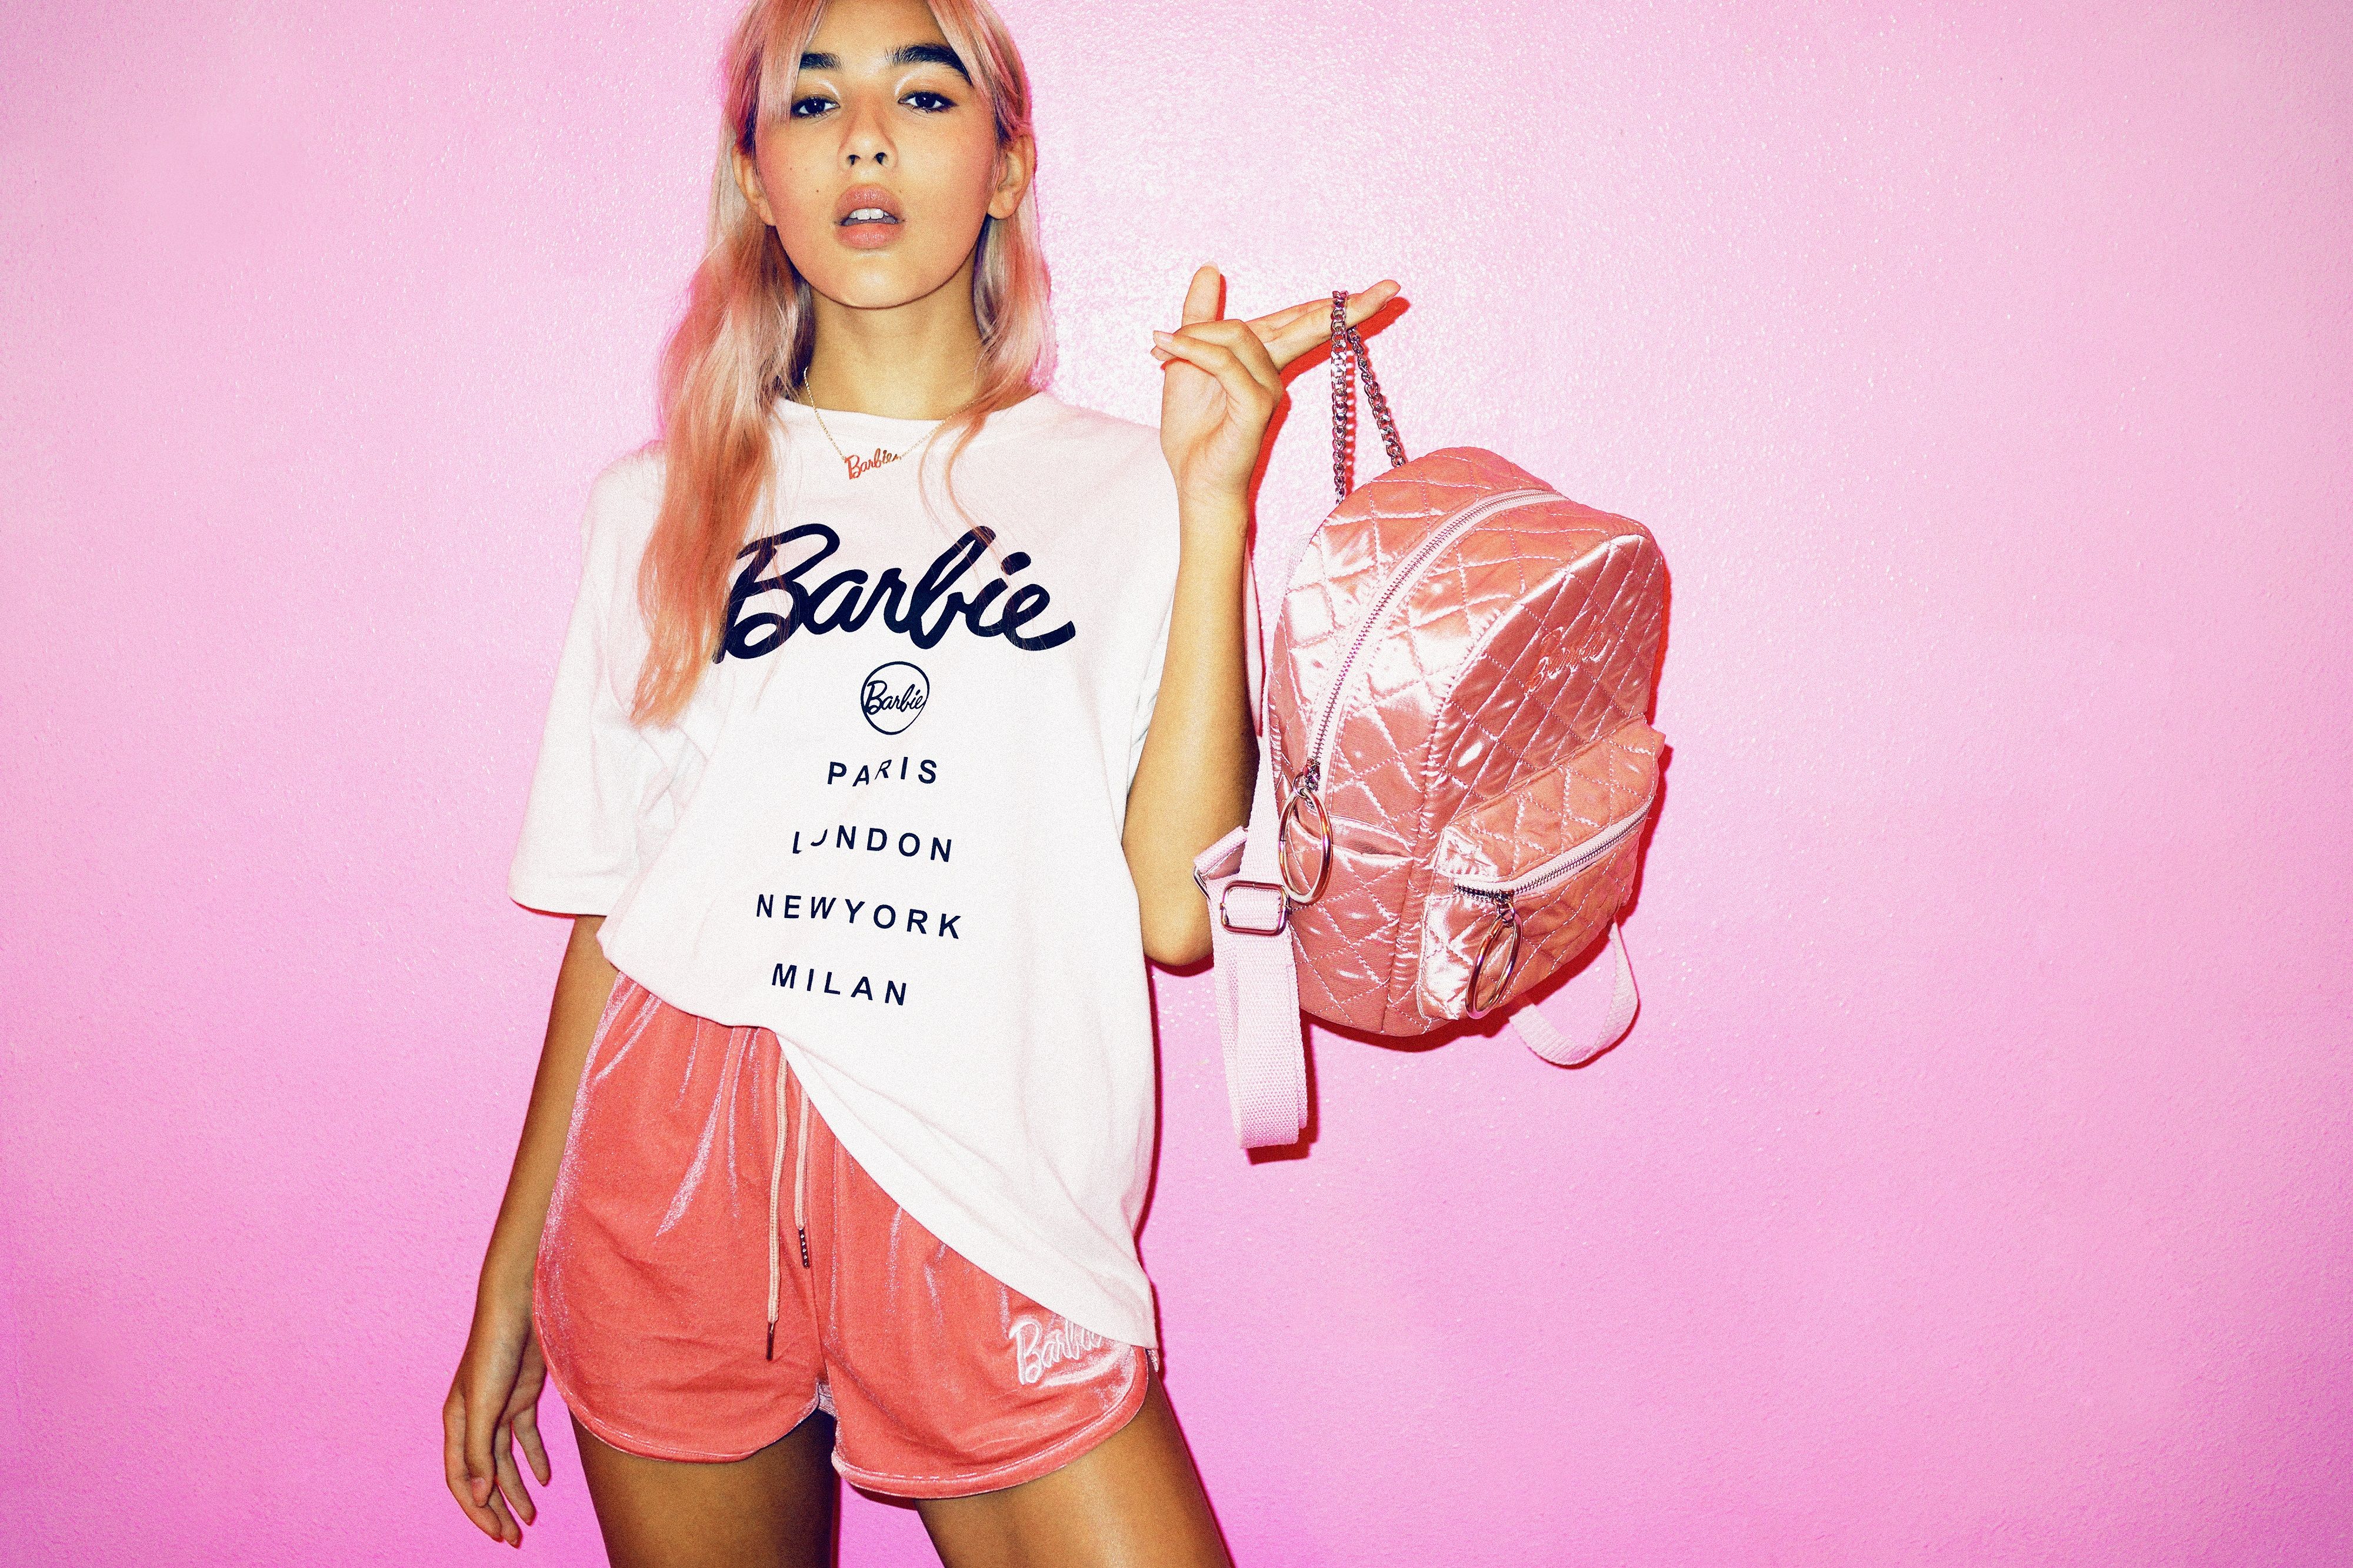 Missguided have launched a Barbie collection